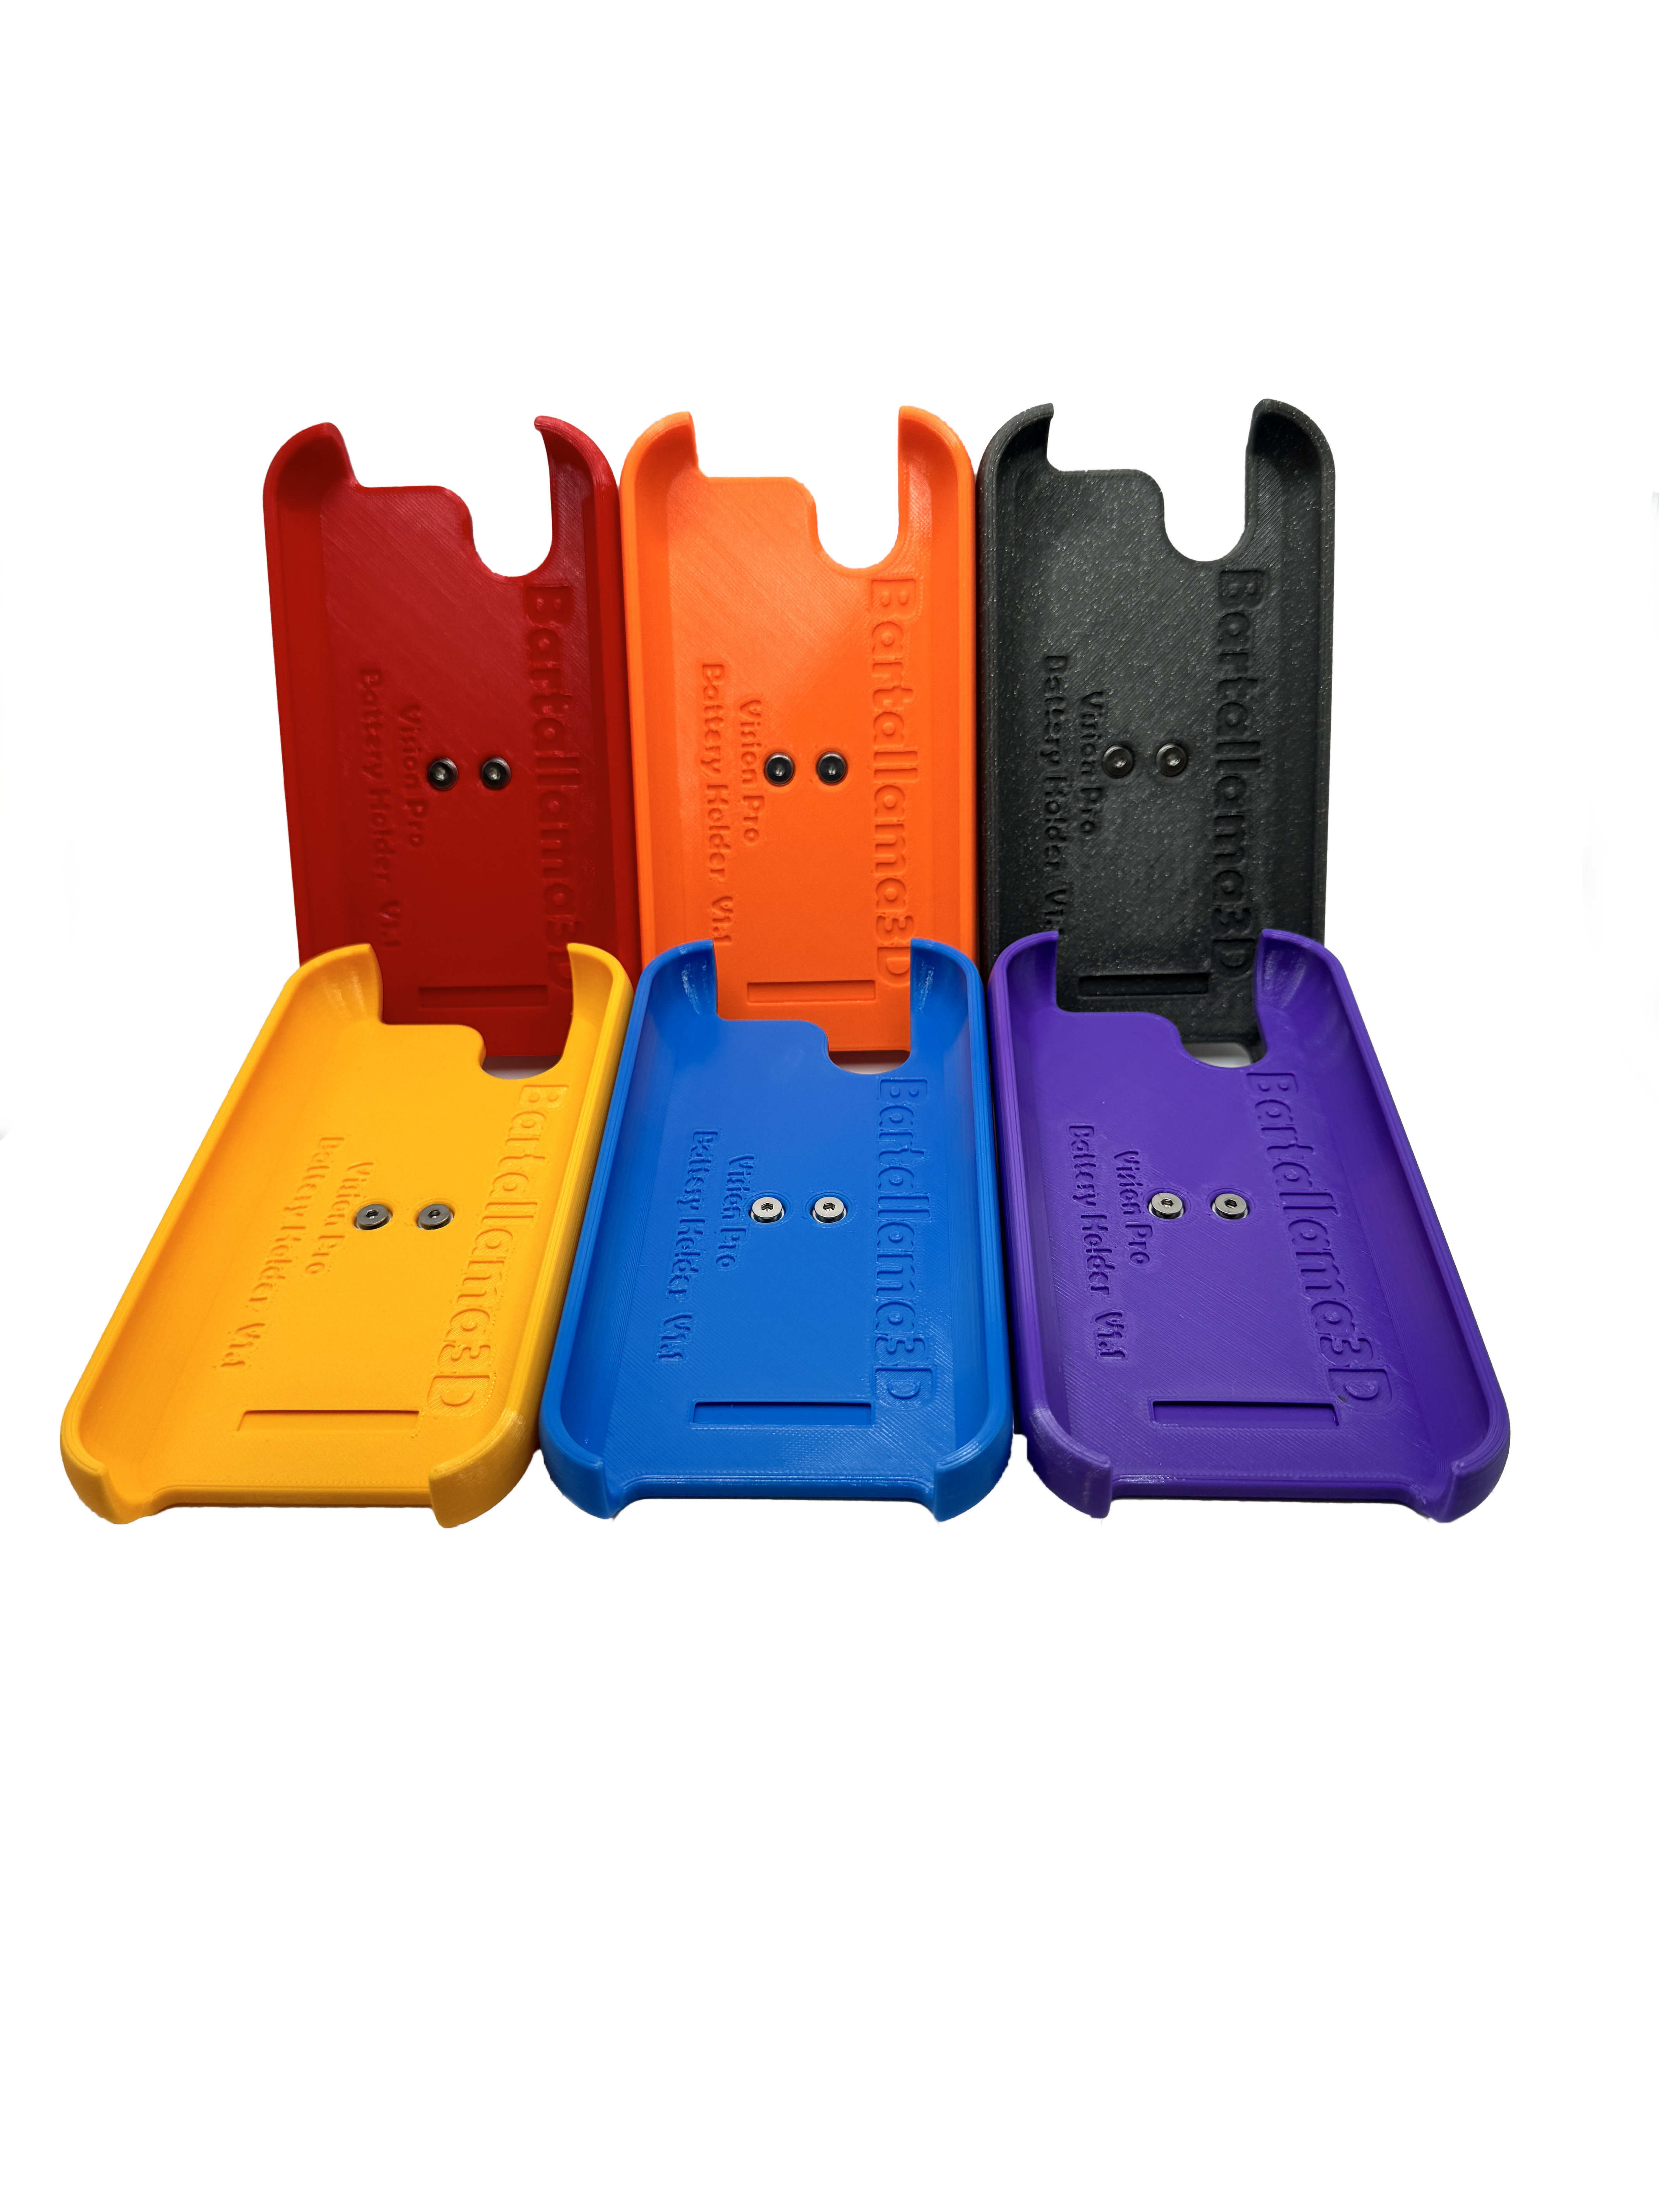 A picture of the battery holder in 6 different colors Red, Blue, Orange, Purple, Glitter Gray, and Yellow